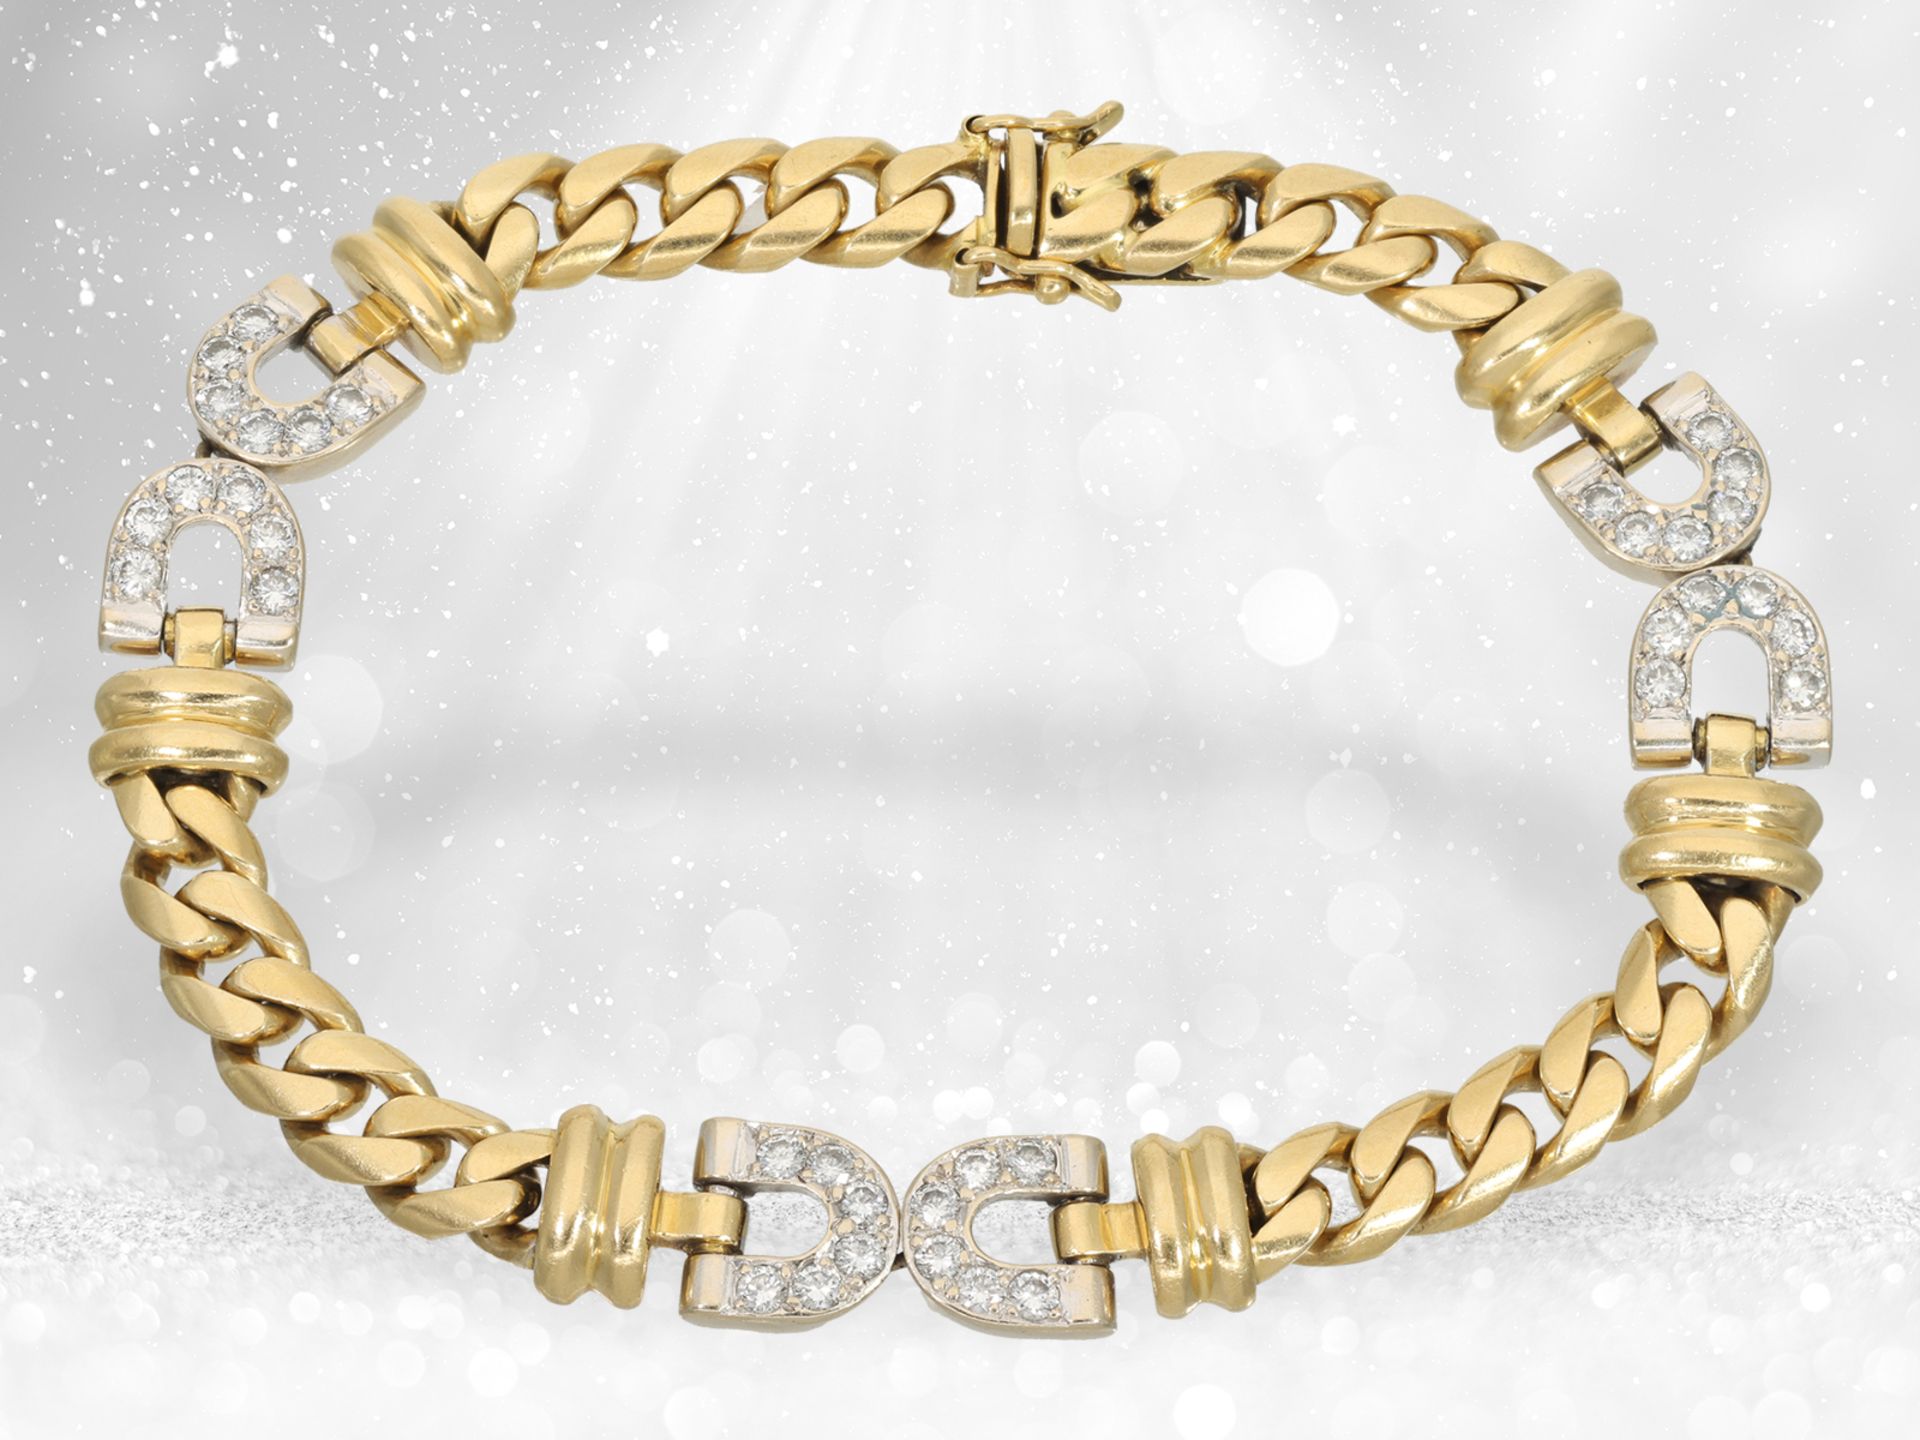 Heavy brilliant-cut diamond goldsmith's necklace with matching bracelet, handcrafted from 18K gold,  - Image 3 of 4